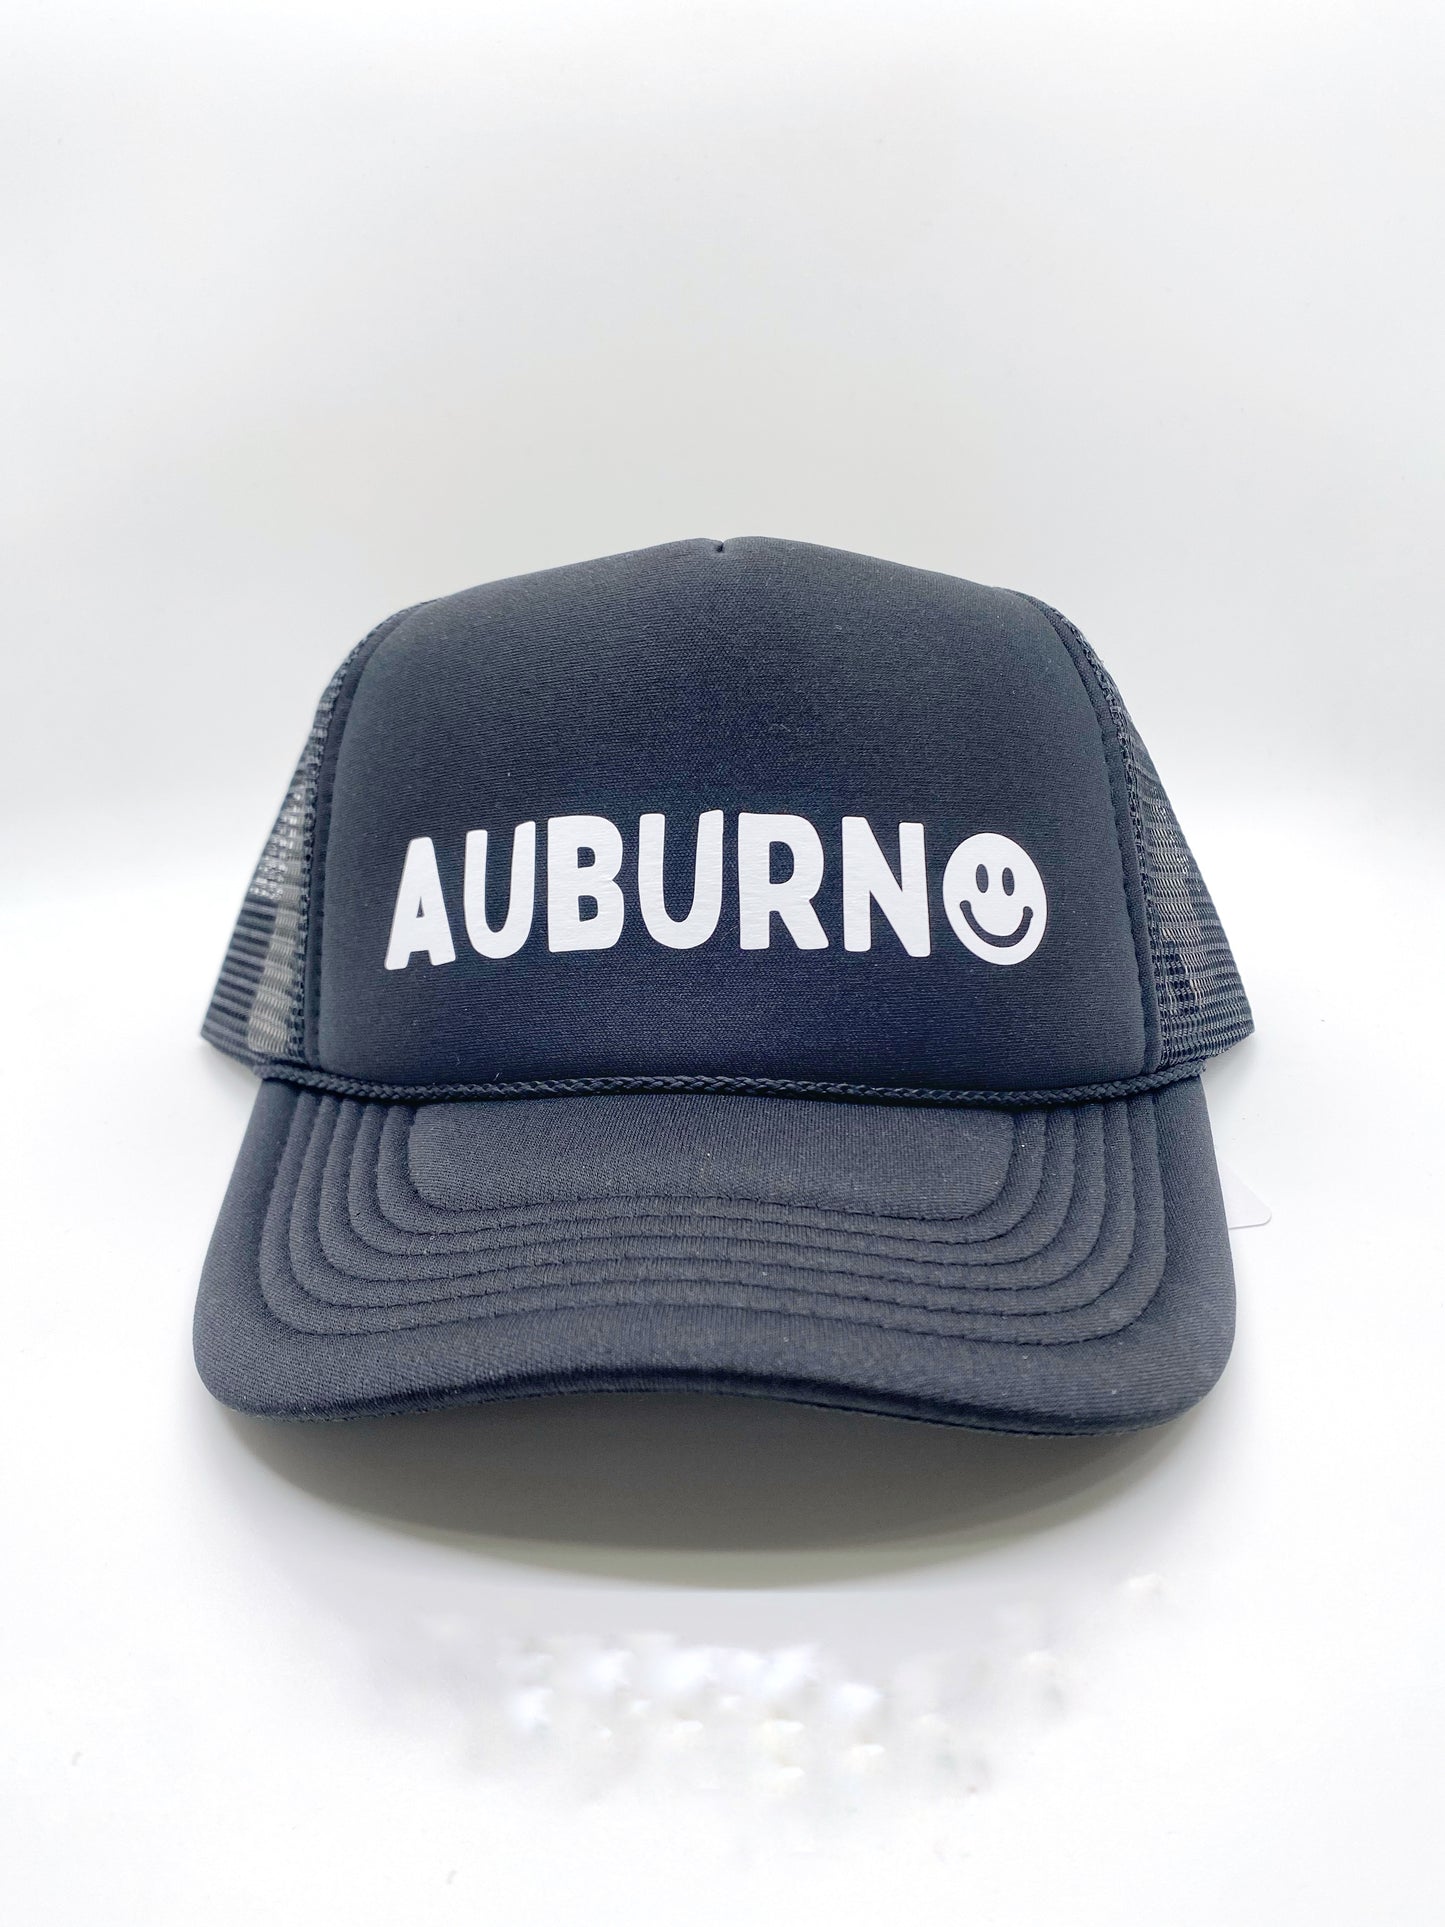 Show your Auburn, Alabama pride with this cute unisex trucker-style hat. The smiley face accent adds the perfect touch to show your love. After all, you are never fully dressed without a smile.   100% Cotton, Adjustable Back